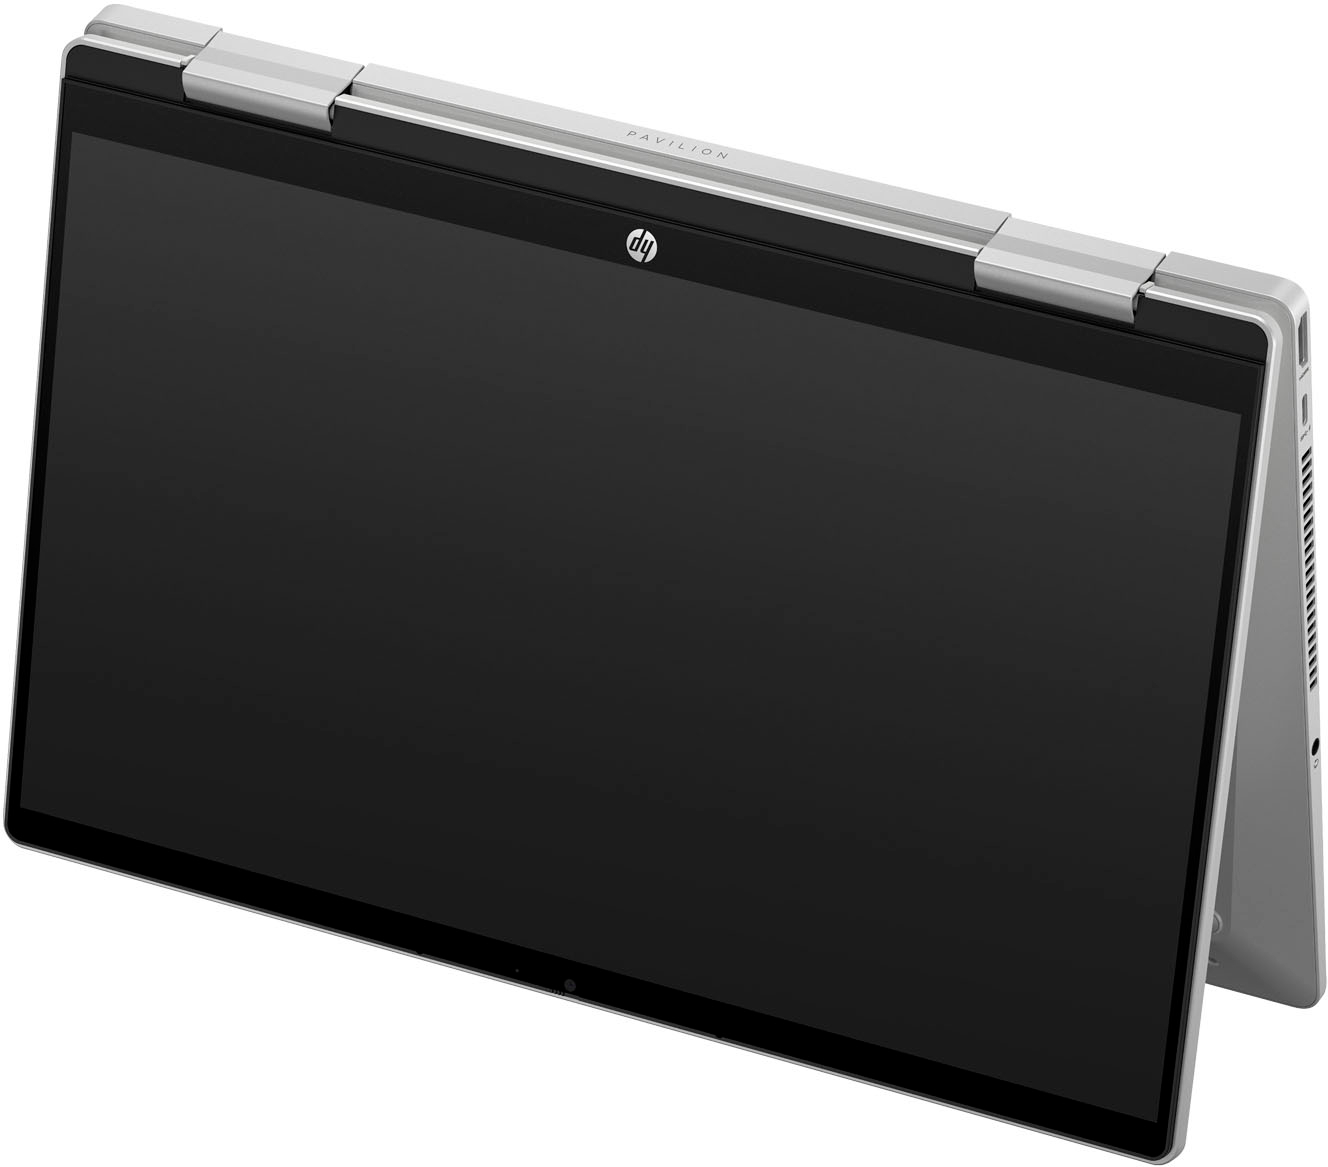 HP - Pavilion x360 2-in-1 14 Touch-Screen Laptop - Intel Core i5 - 8GB  Memory - 512GB SSD - Natural Silver 14-ek0033dx Tablet Notebook